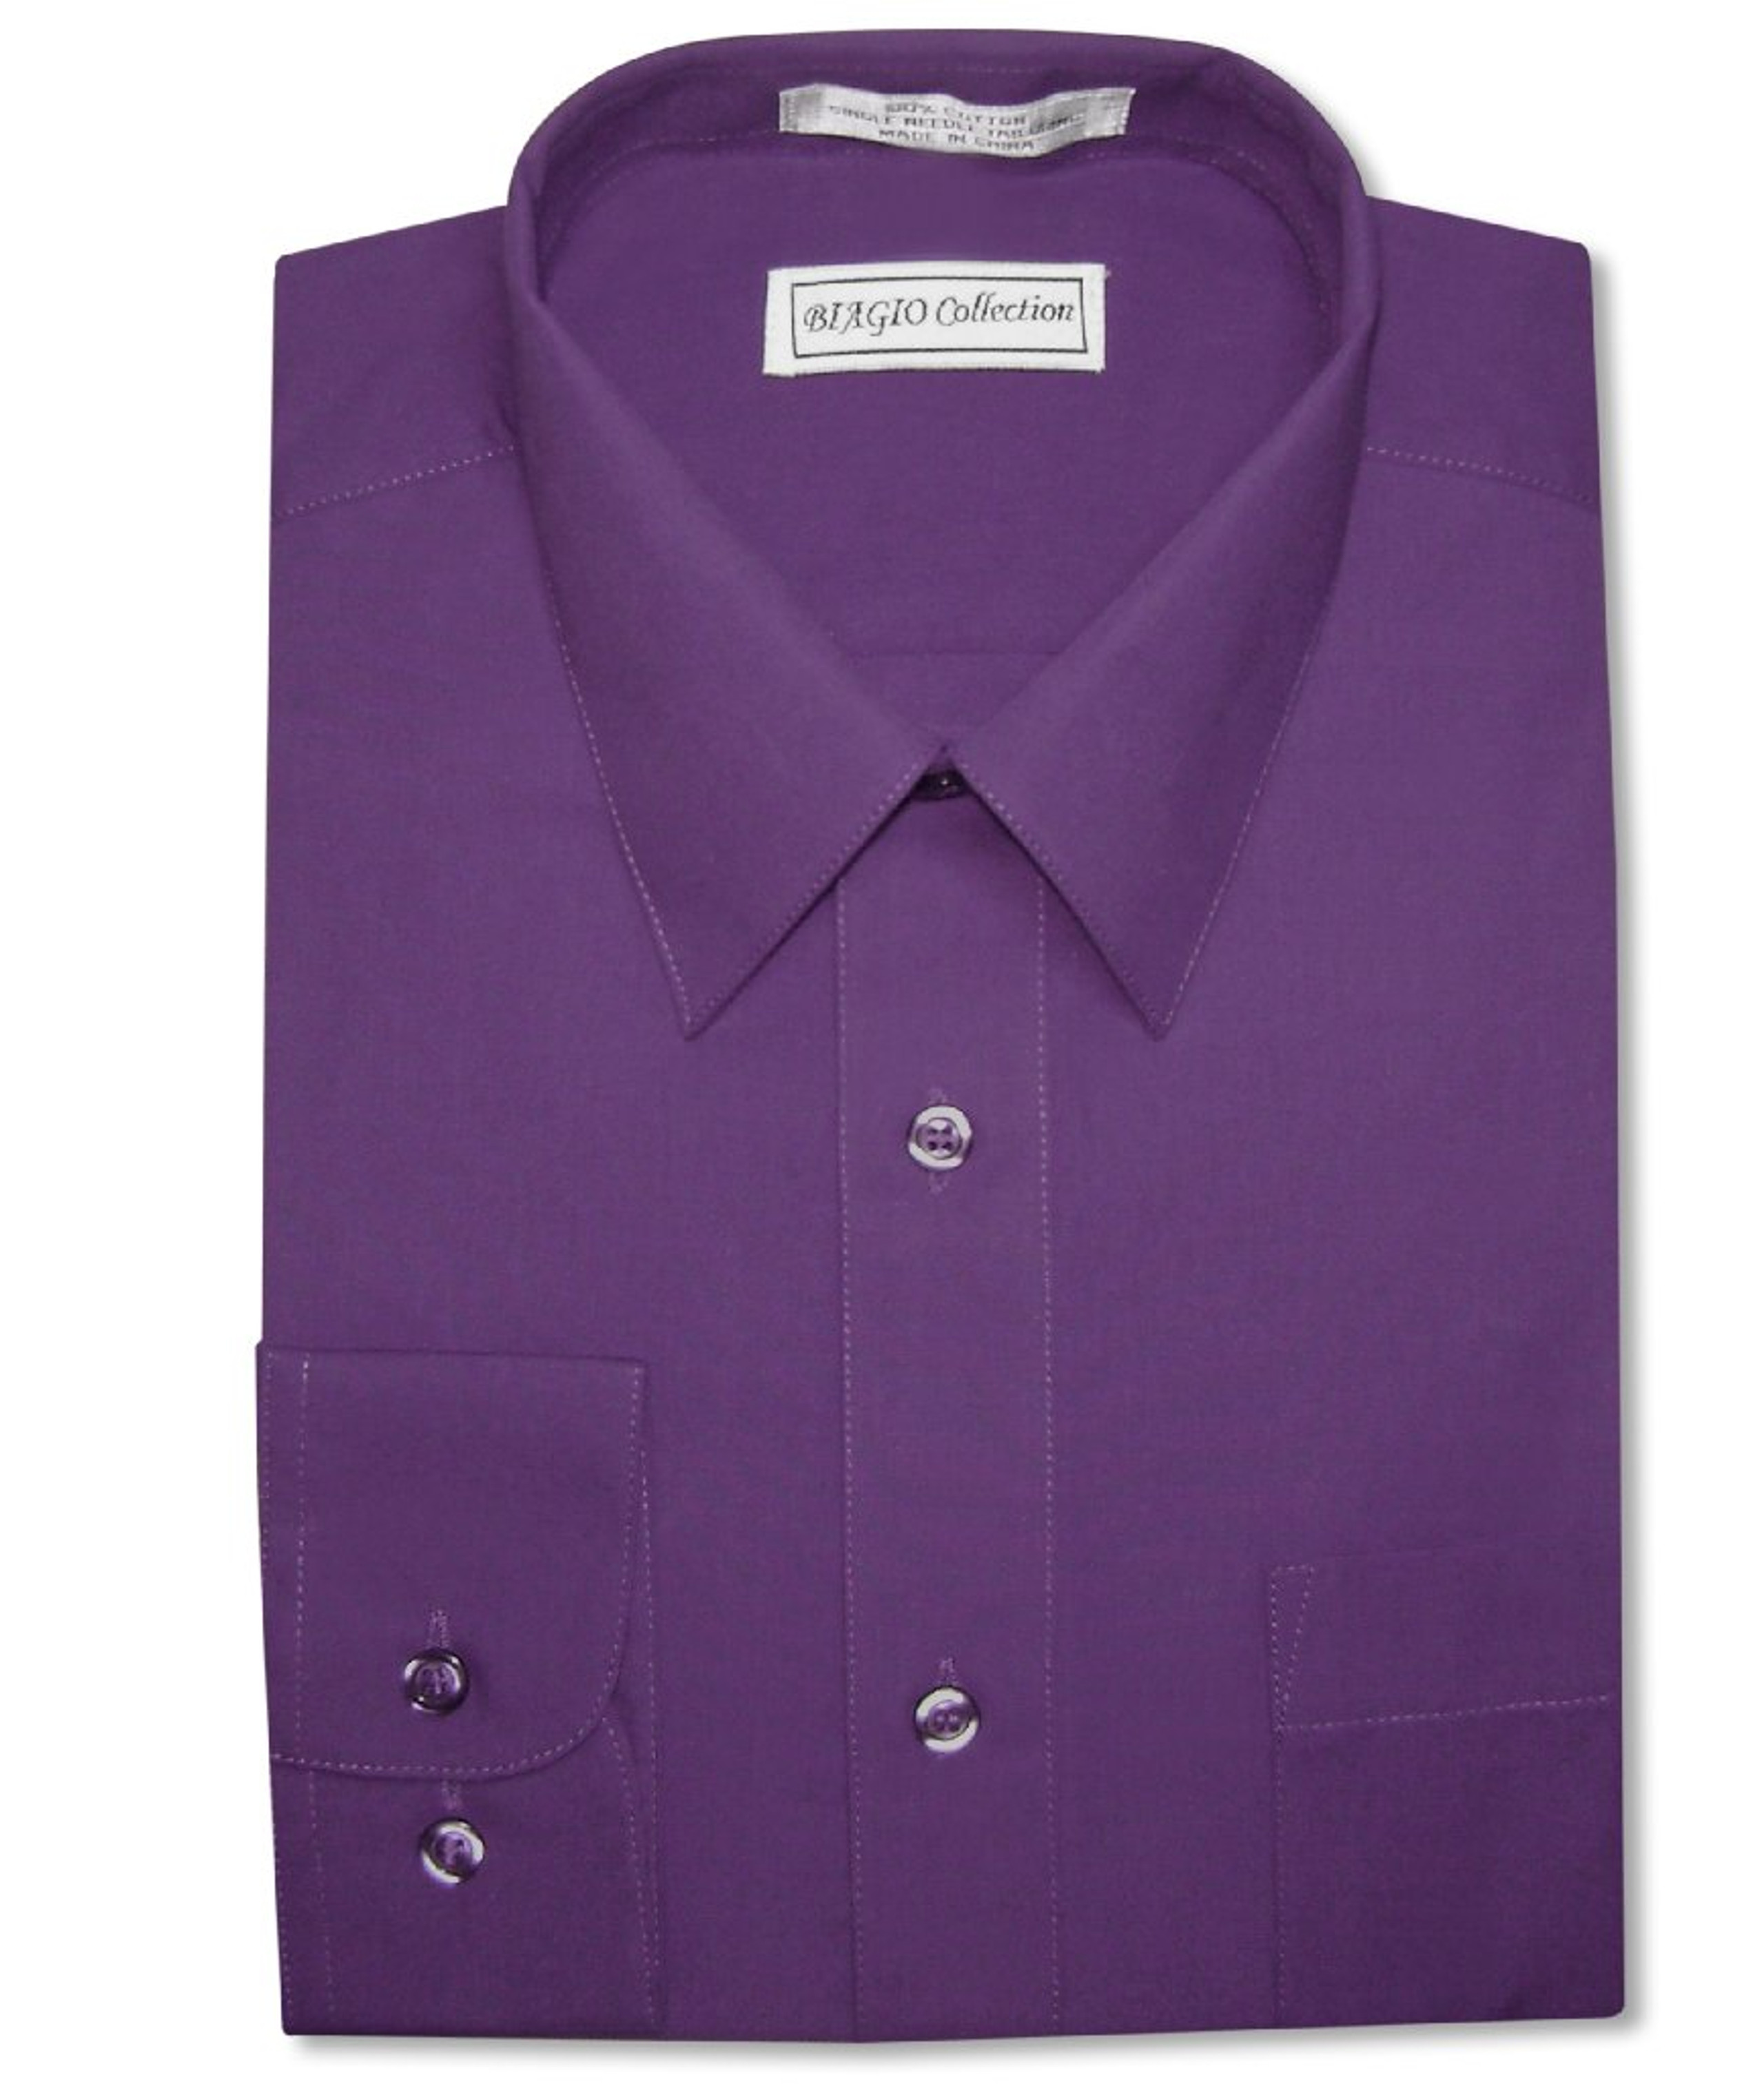 Biagio Mens All Cotton Solid Purple Dress Shirt with Convertible Cuffs